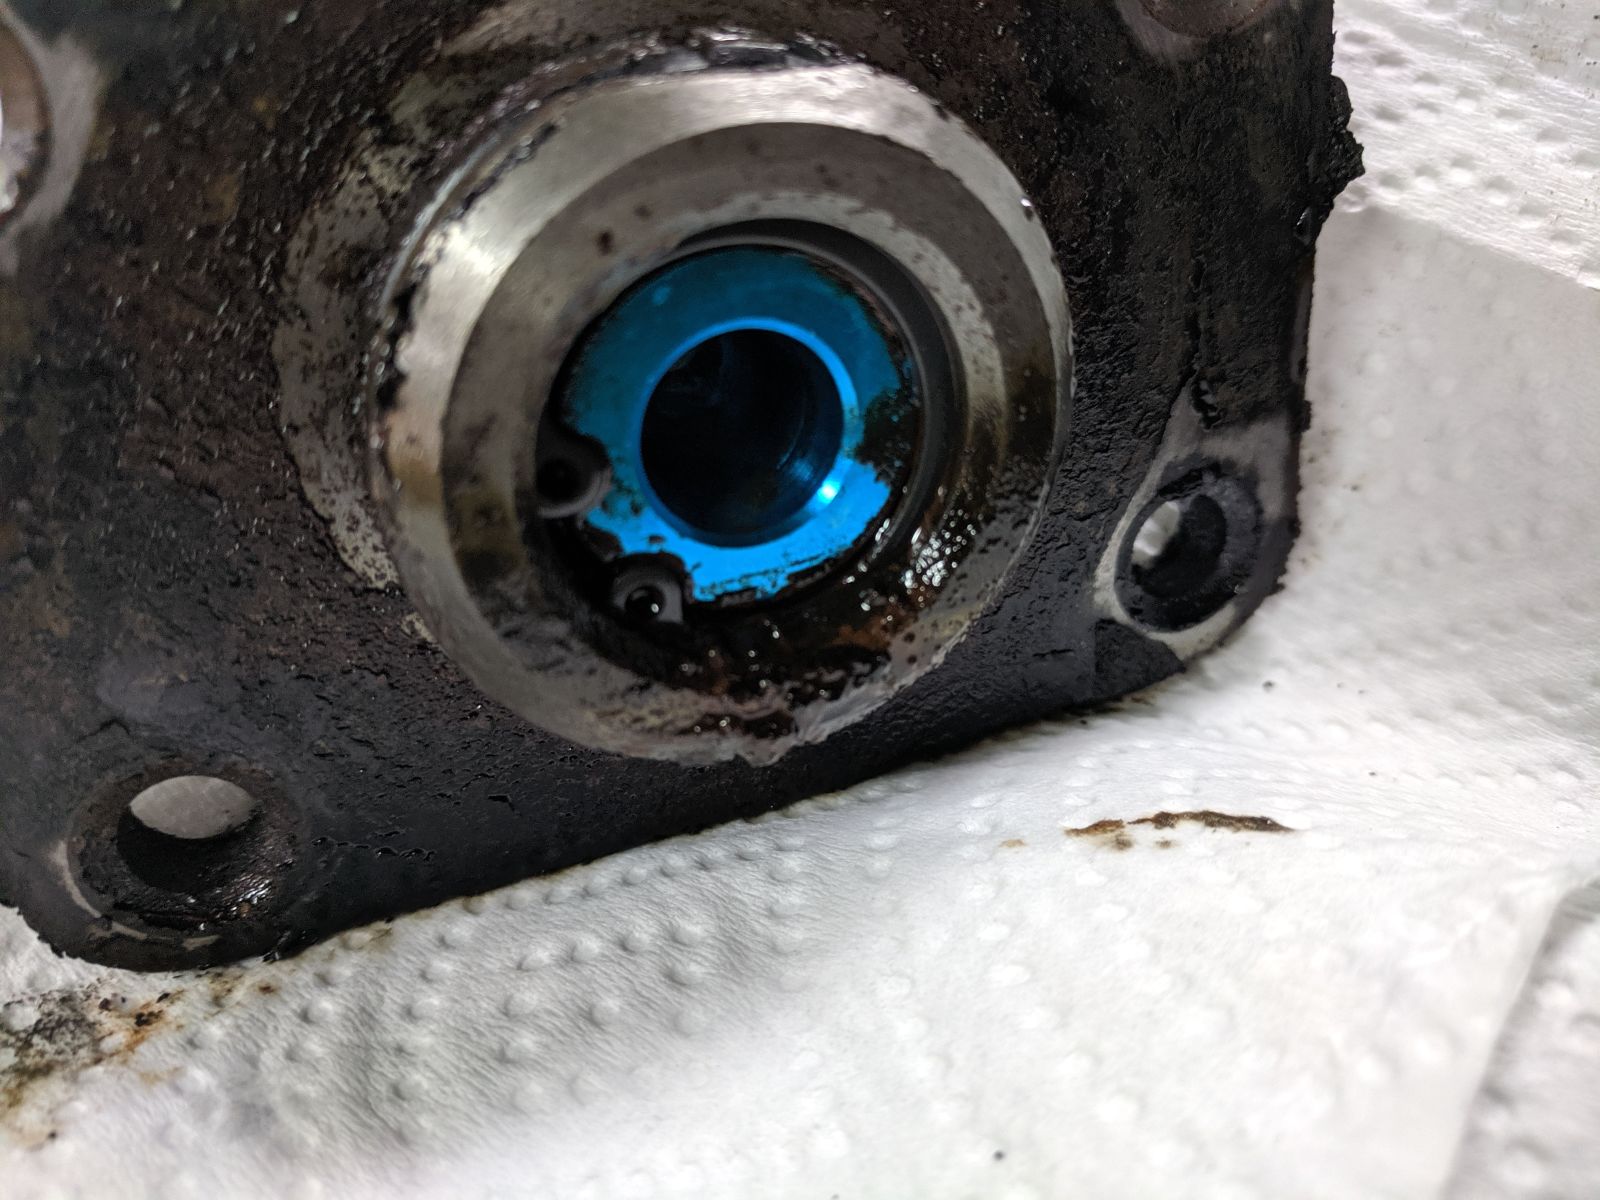 Leaking point confirmed on old part.